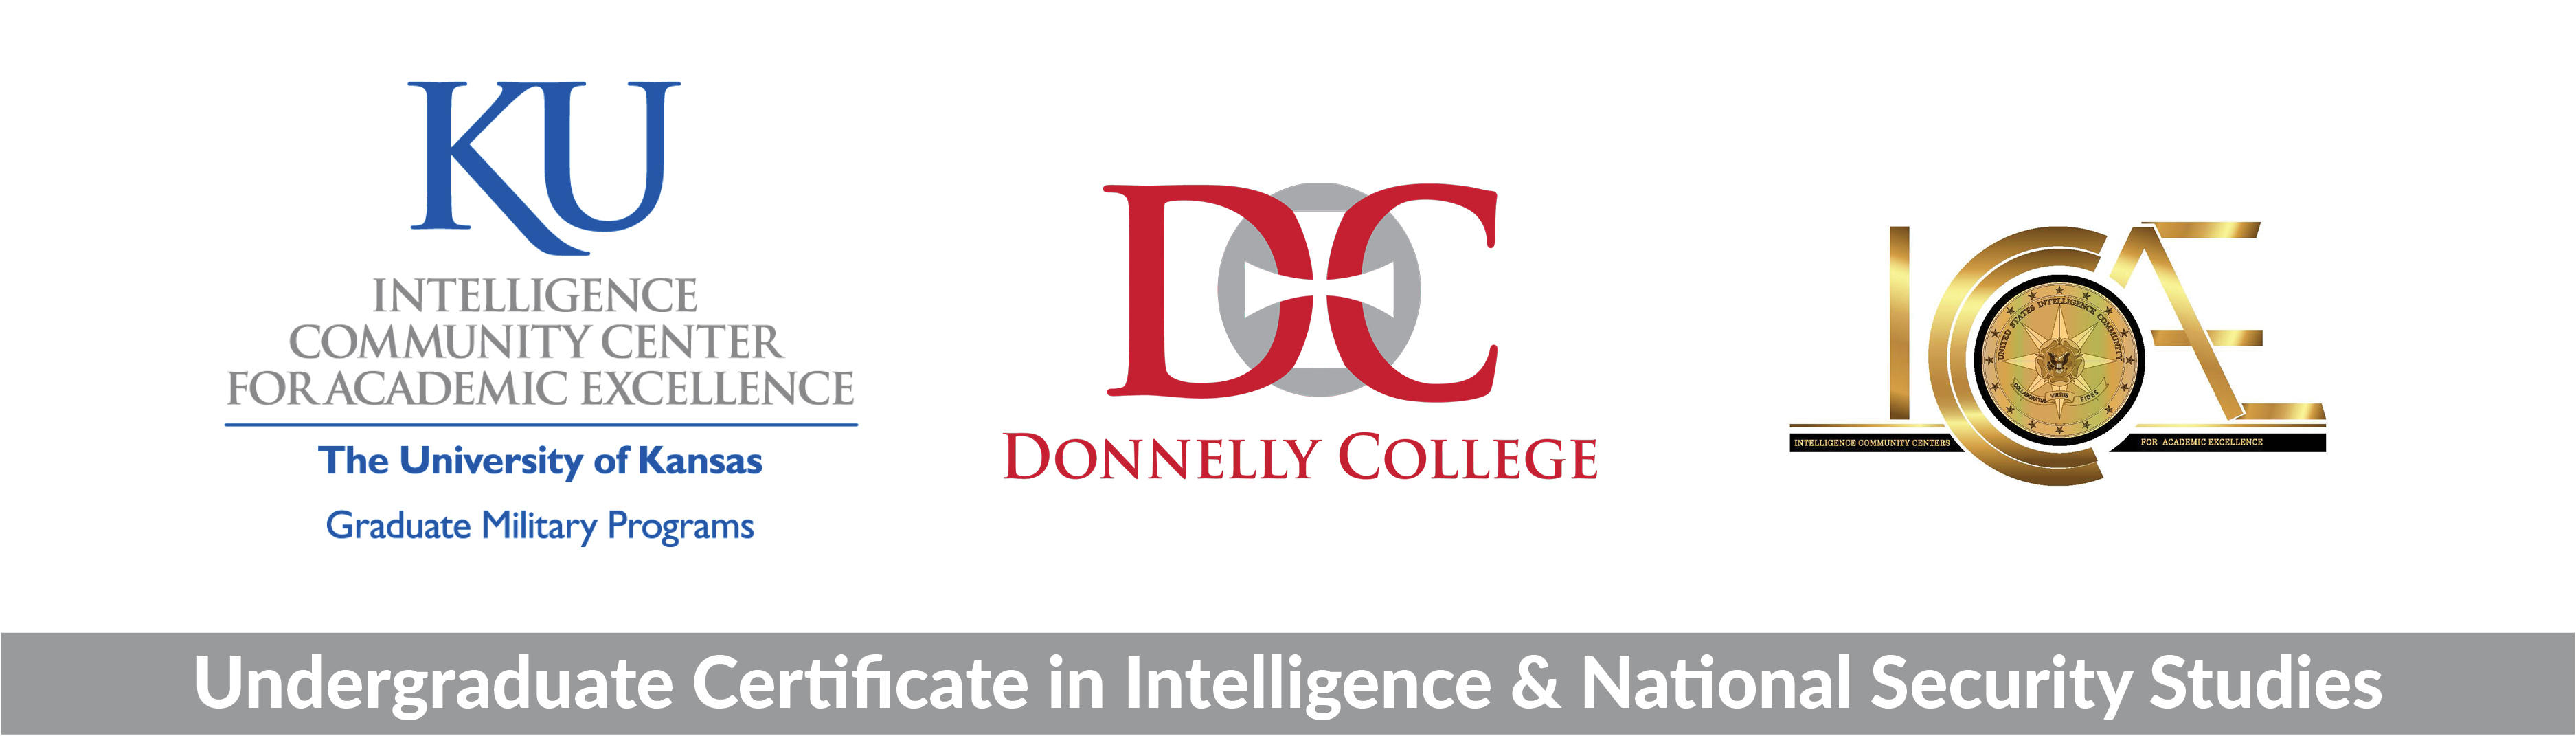 Header image with Donnelly, KU and ICCAE logos 